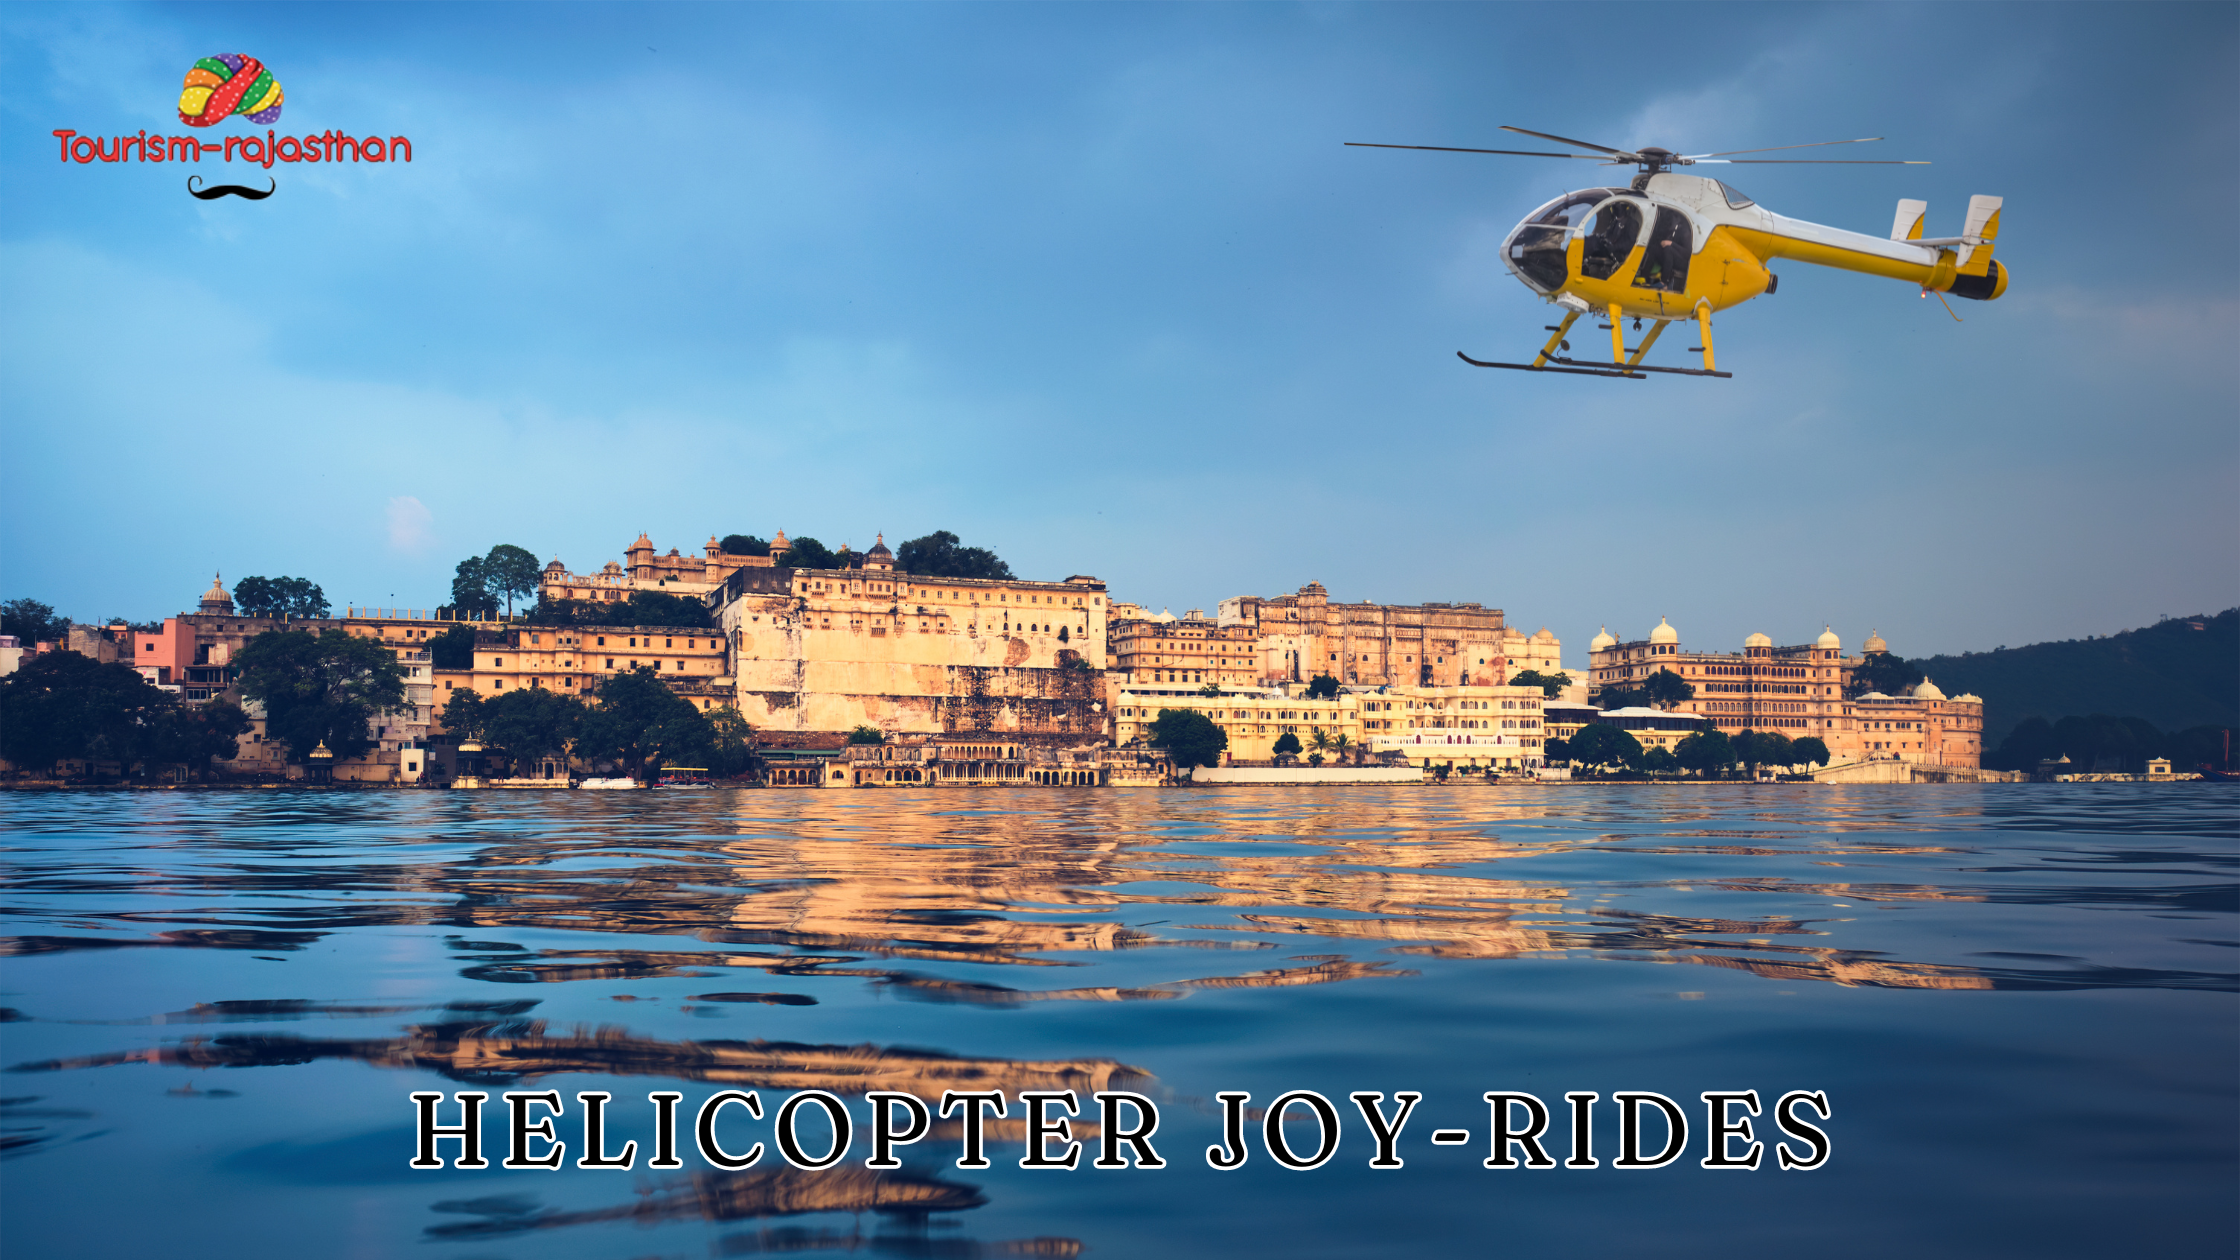 helicopter joy ride in rajasthan